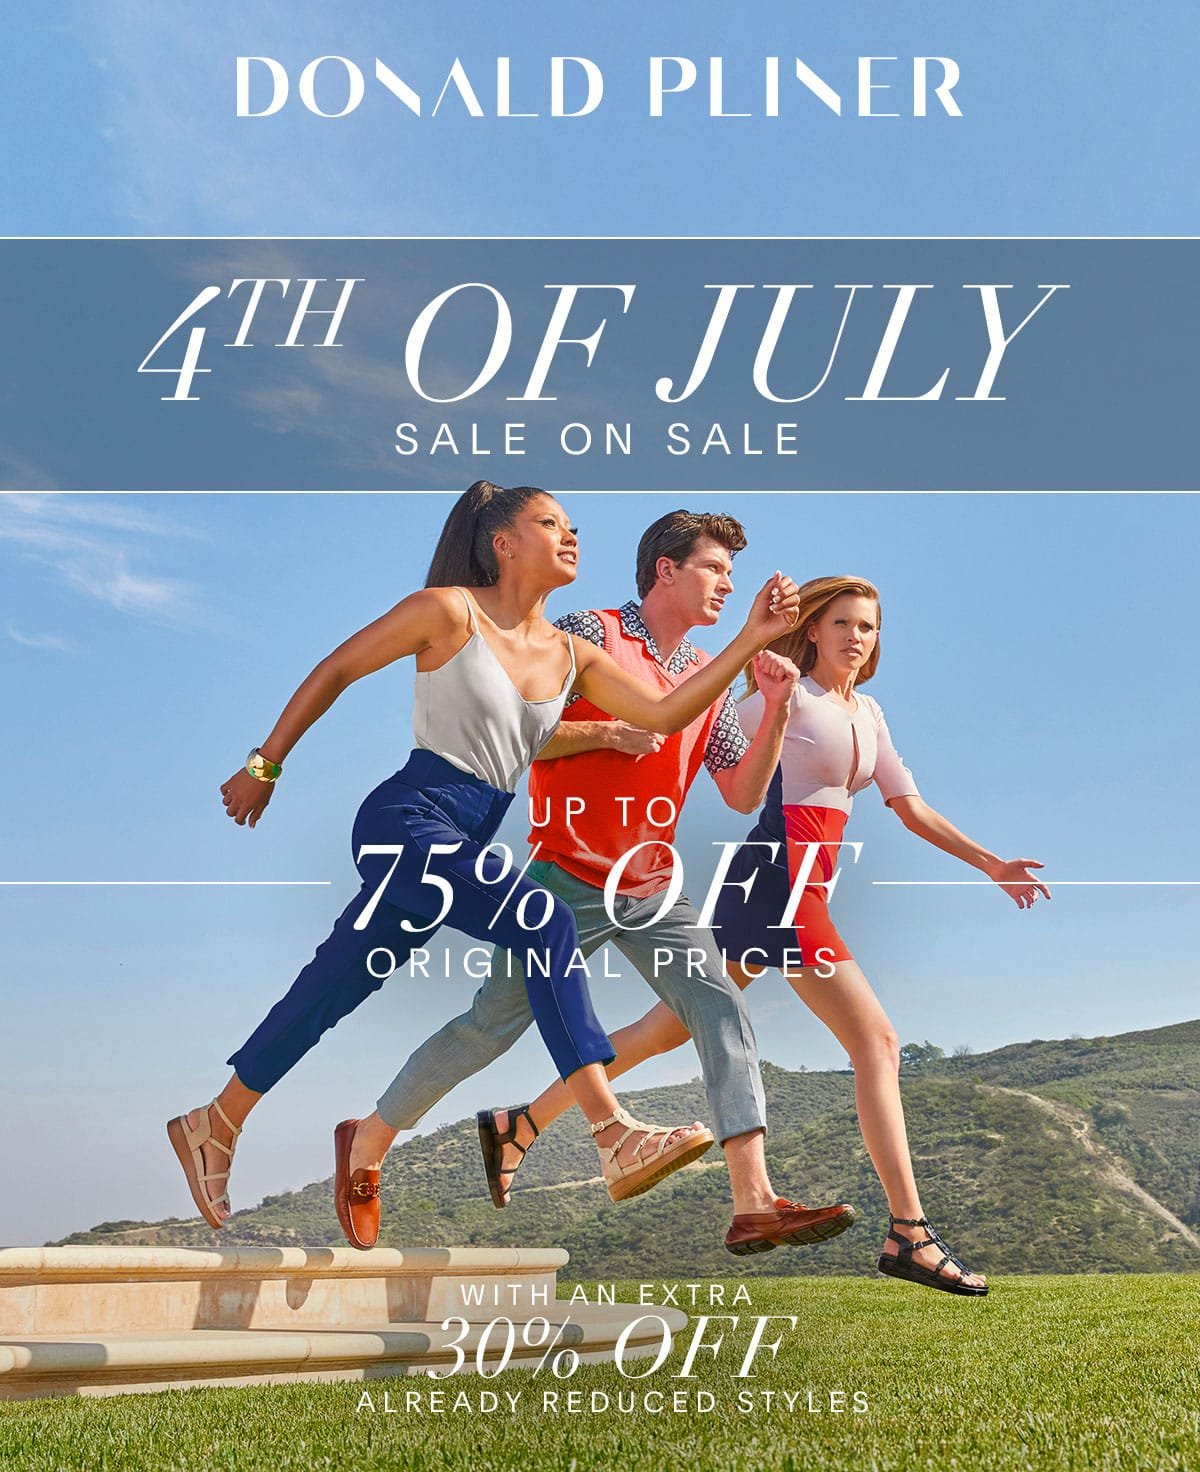 Donald Pliner. 4th of July Sale on Sale. Up to 75% Off Original Prices. with an extra 30% off already reduced styles